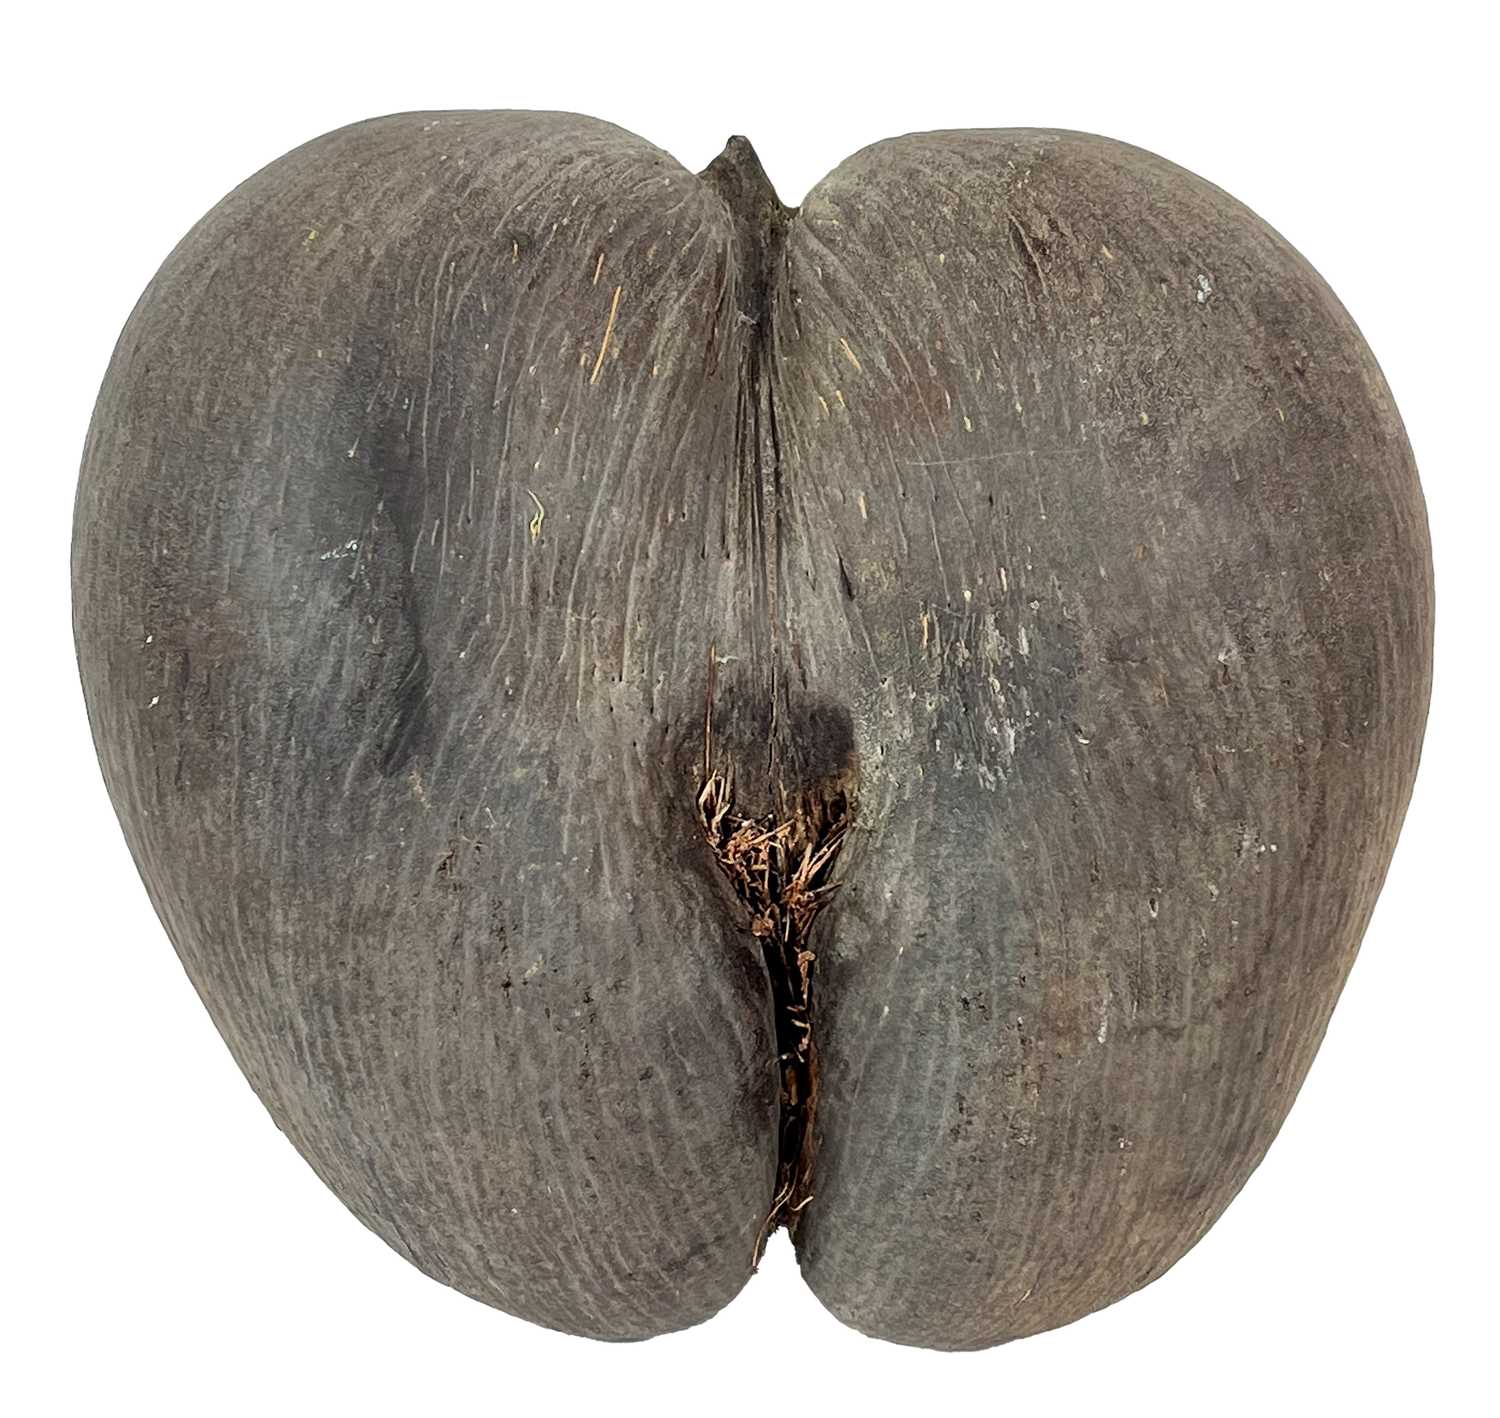 Lot 119 - Natural History: A Large Coco de Mer Nut